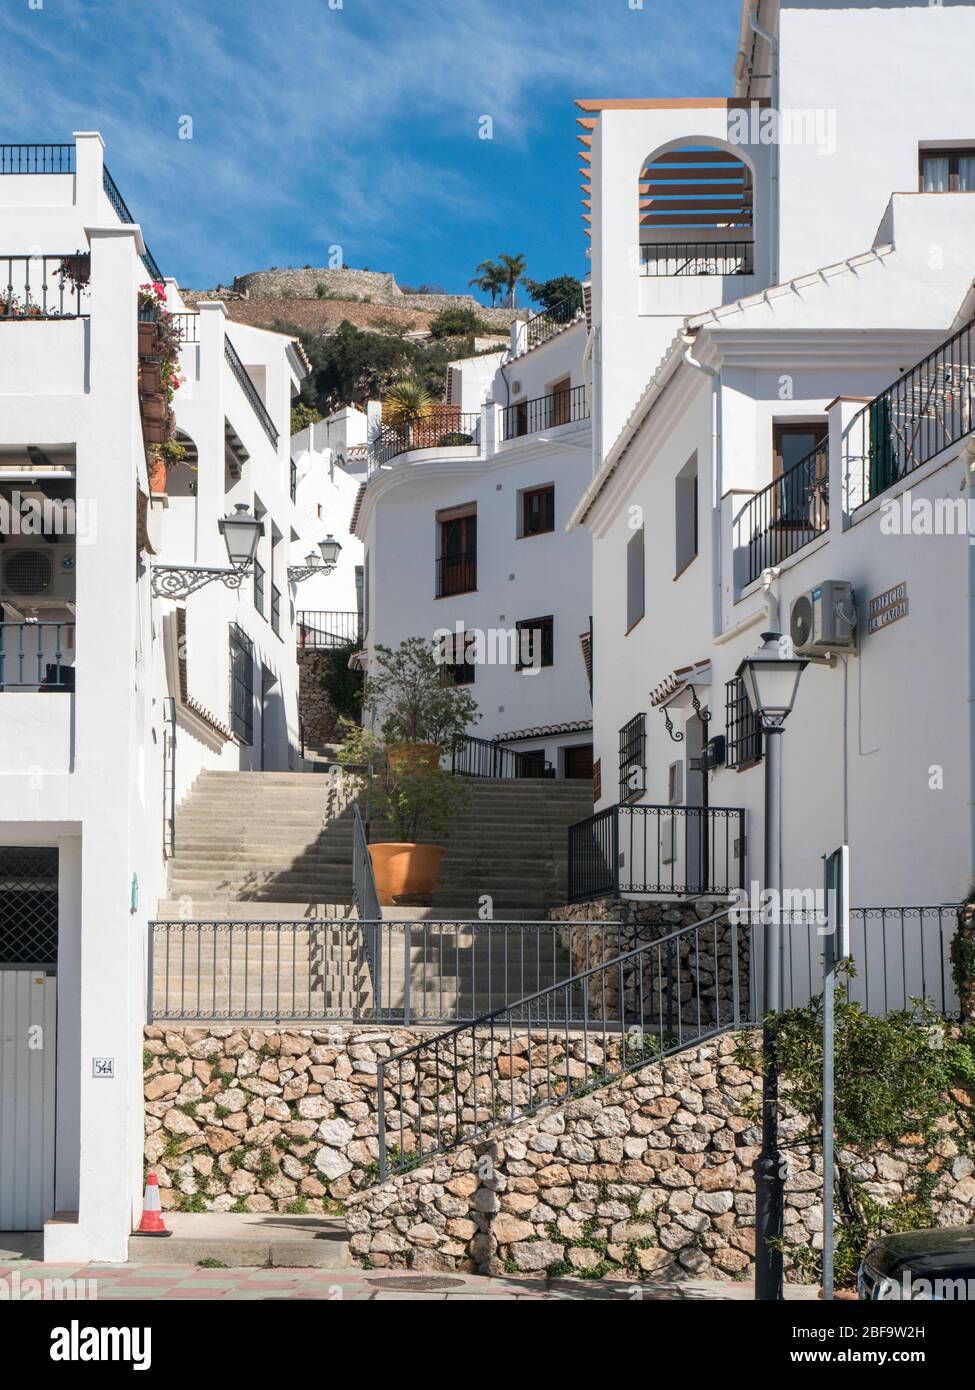 Street scene in Frigiliana, Andalusia, Spain, built on a hillside with white buildings. Stock Photo